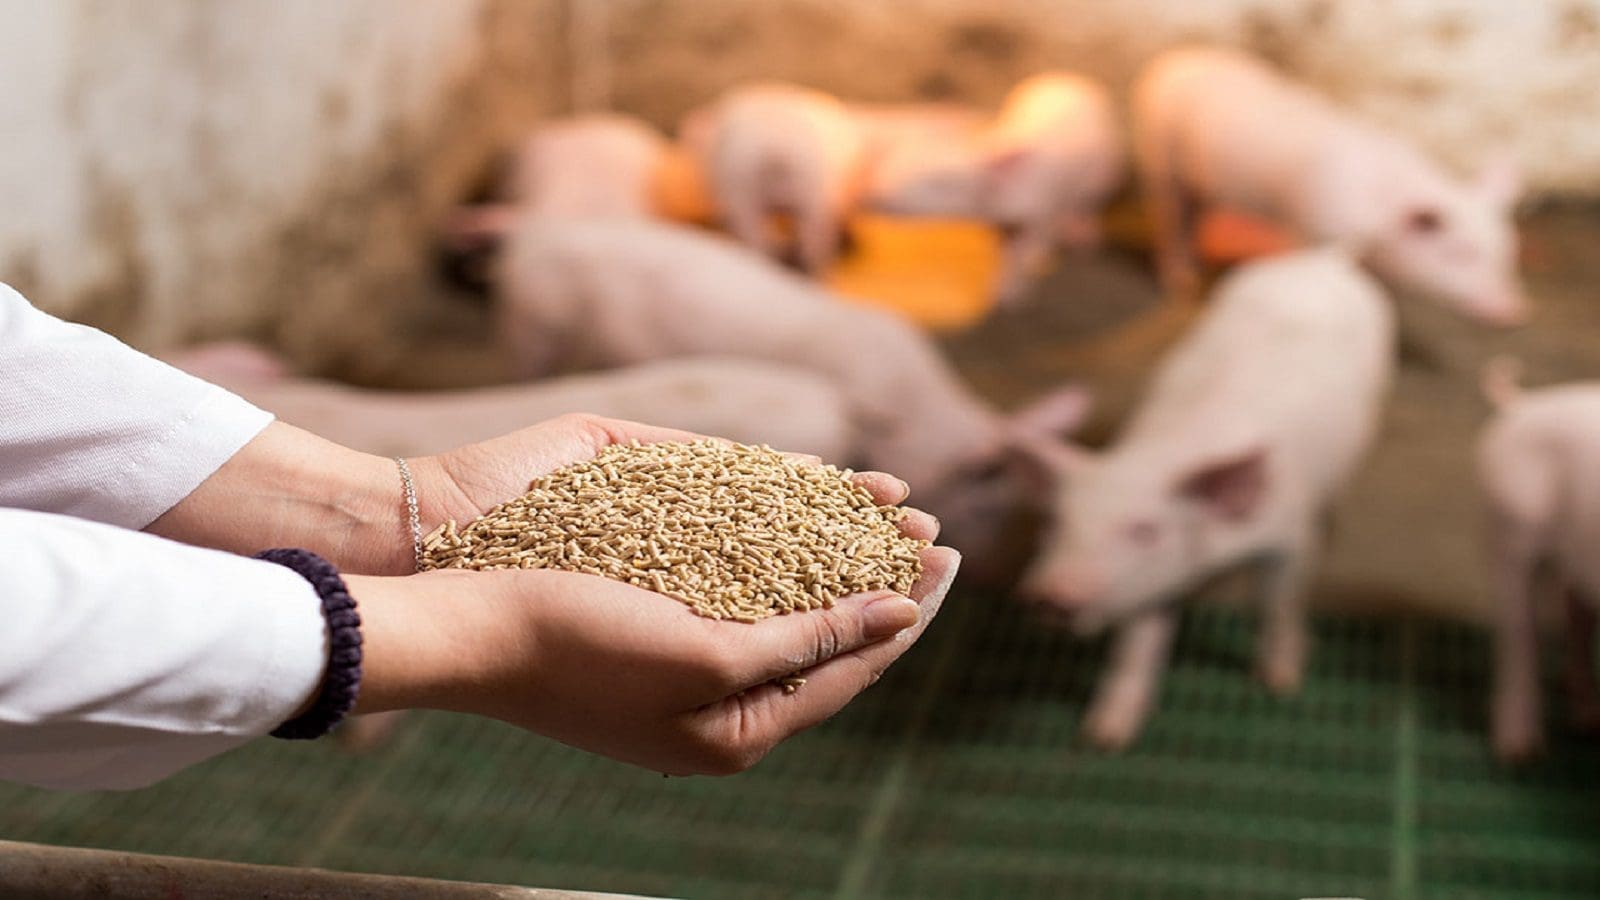 Study investigates feed mill decontamination methods to combat viral risks in swine industry